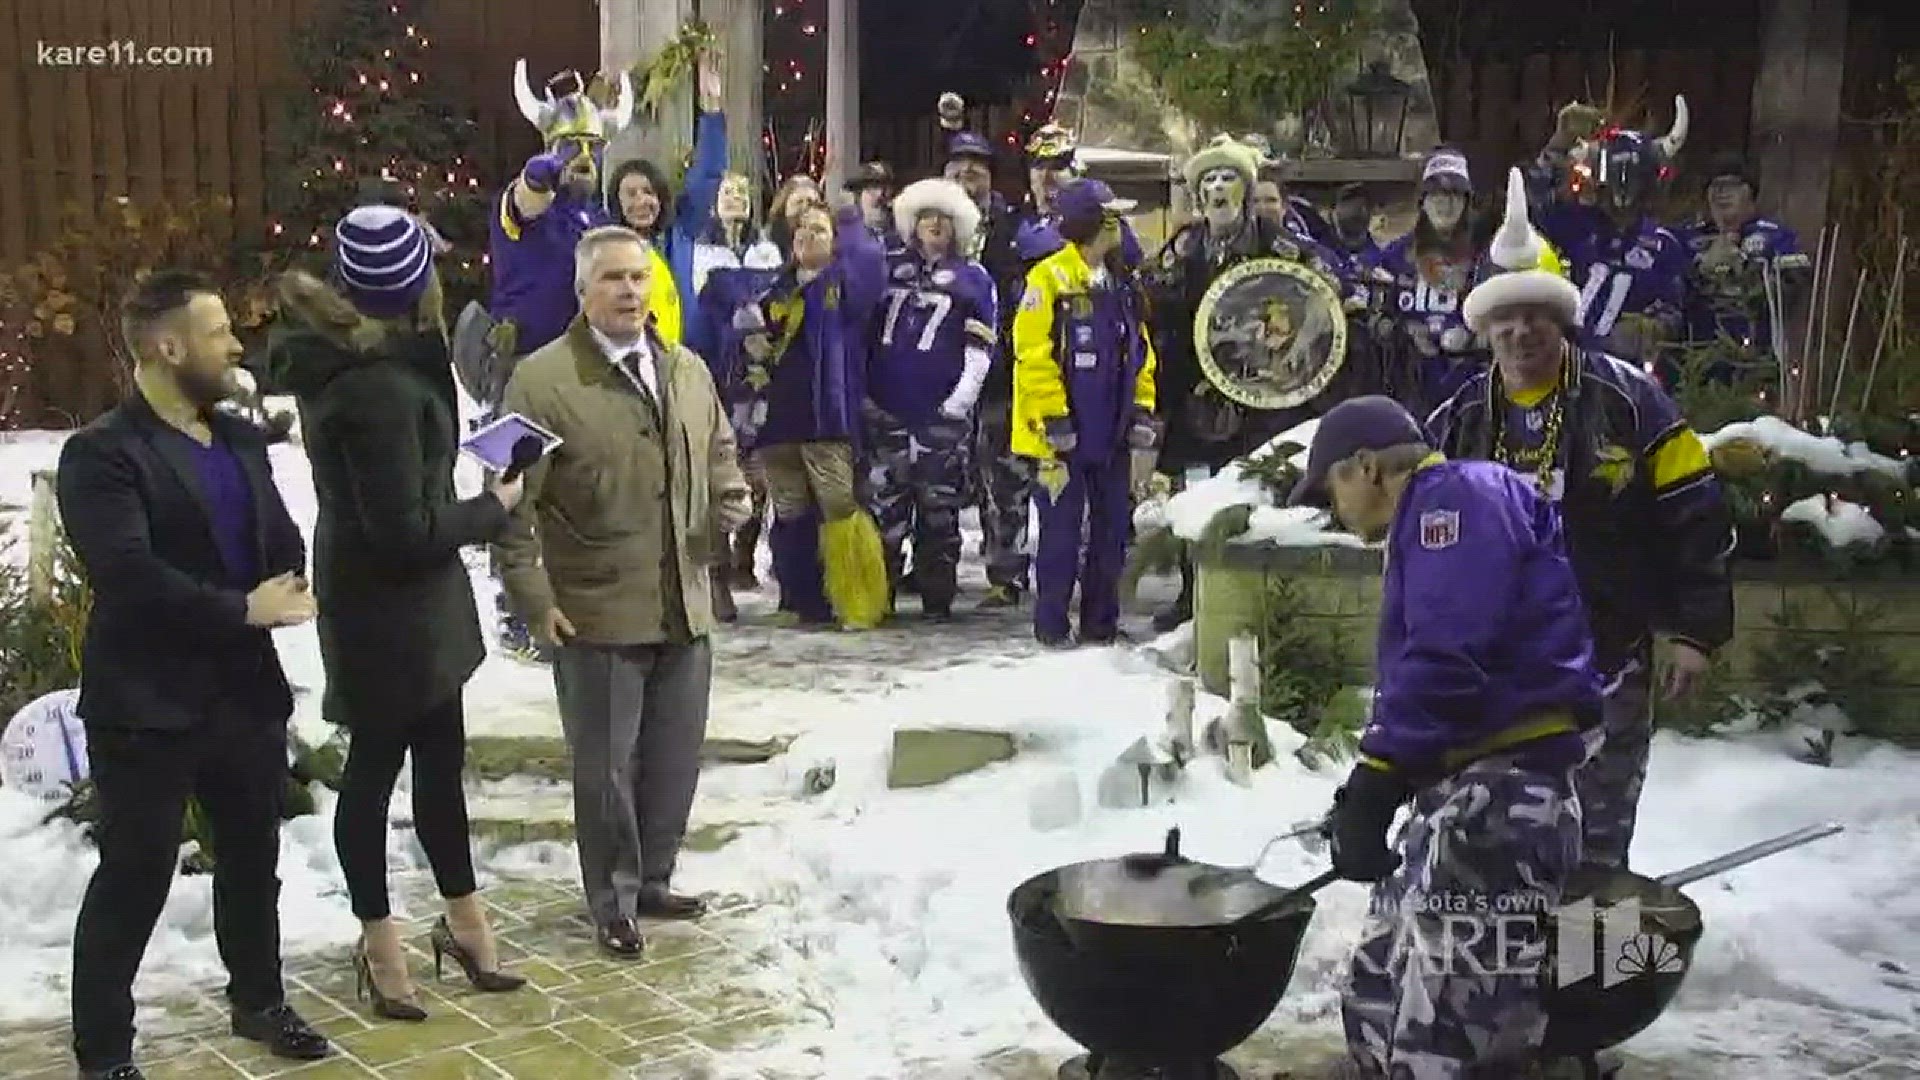 No Minnesota Vikings fan gathering is complete without the Viking World Order. If you want to cheer on the Vikes with the VWO, here are some upcoming events they will be attending or hosting: http://kare11.tv/2rpqFxj